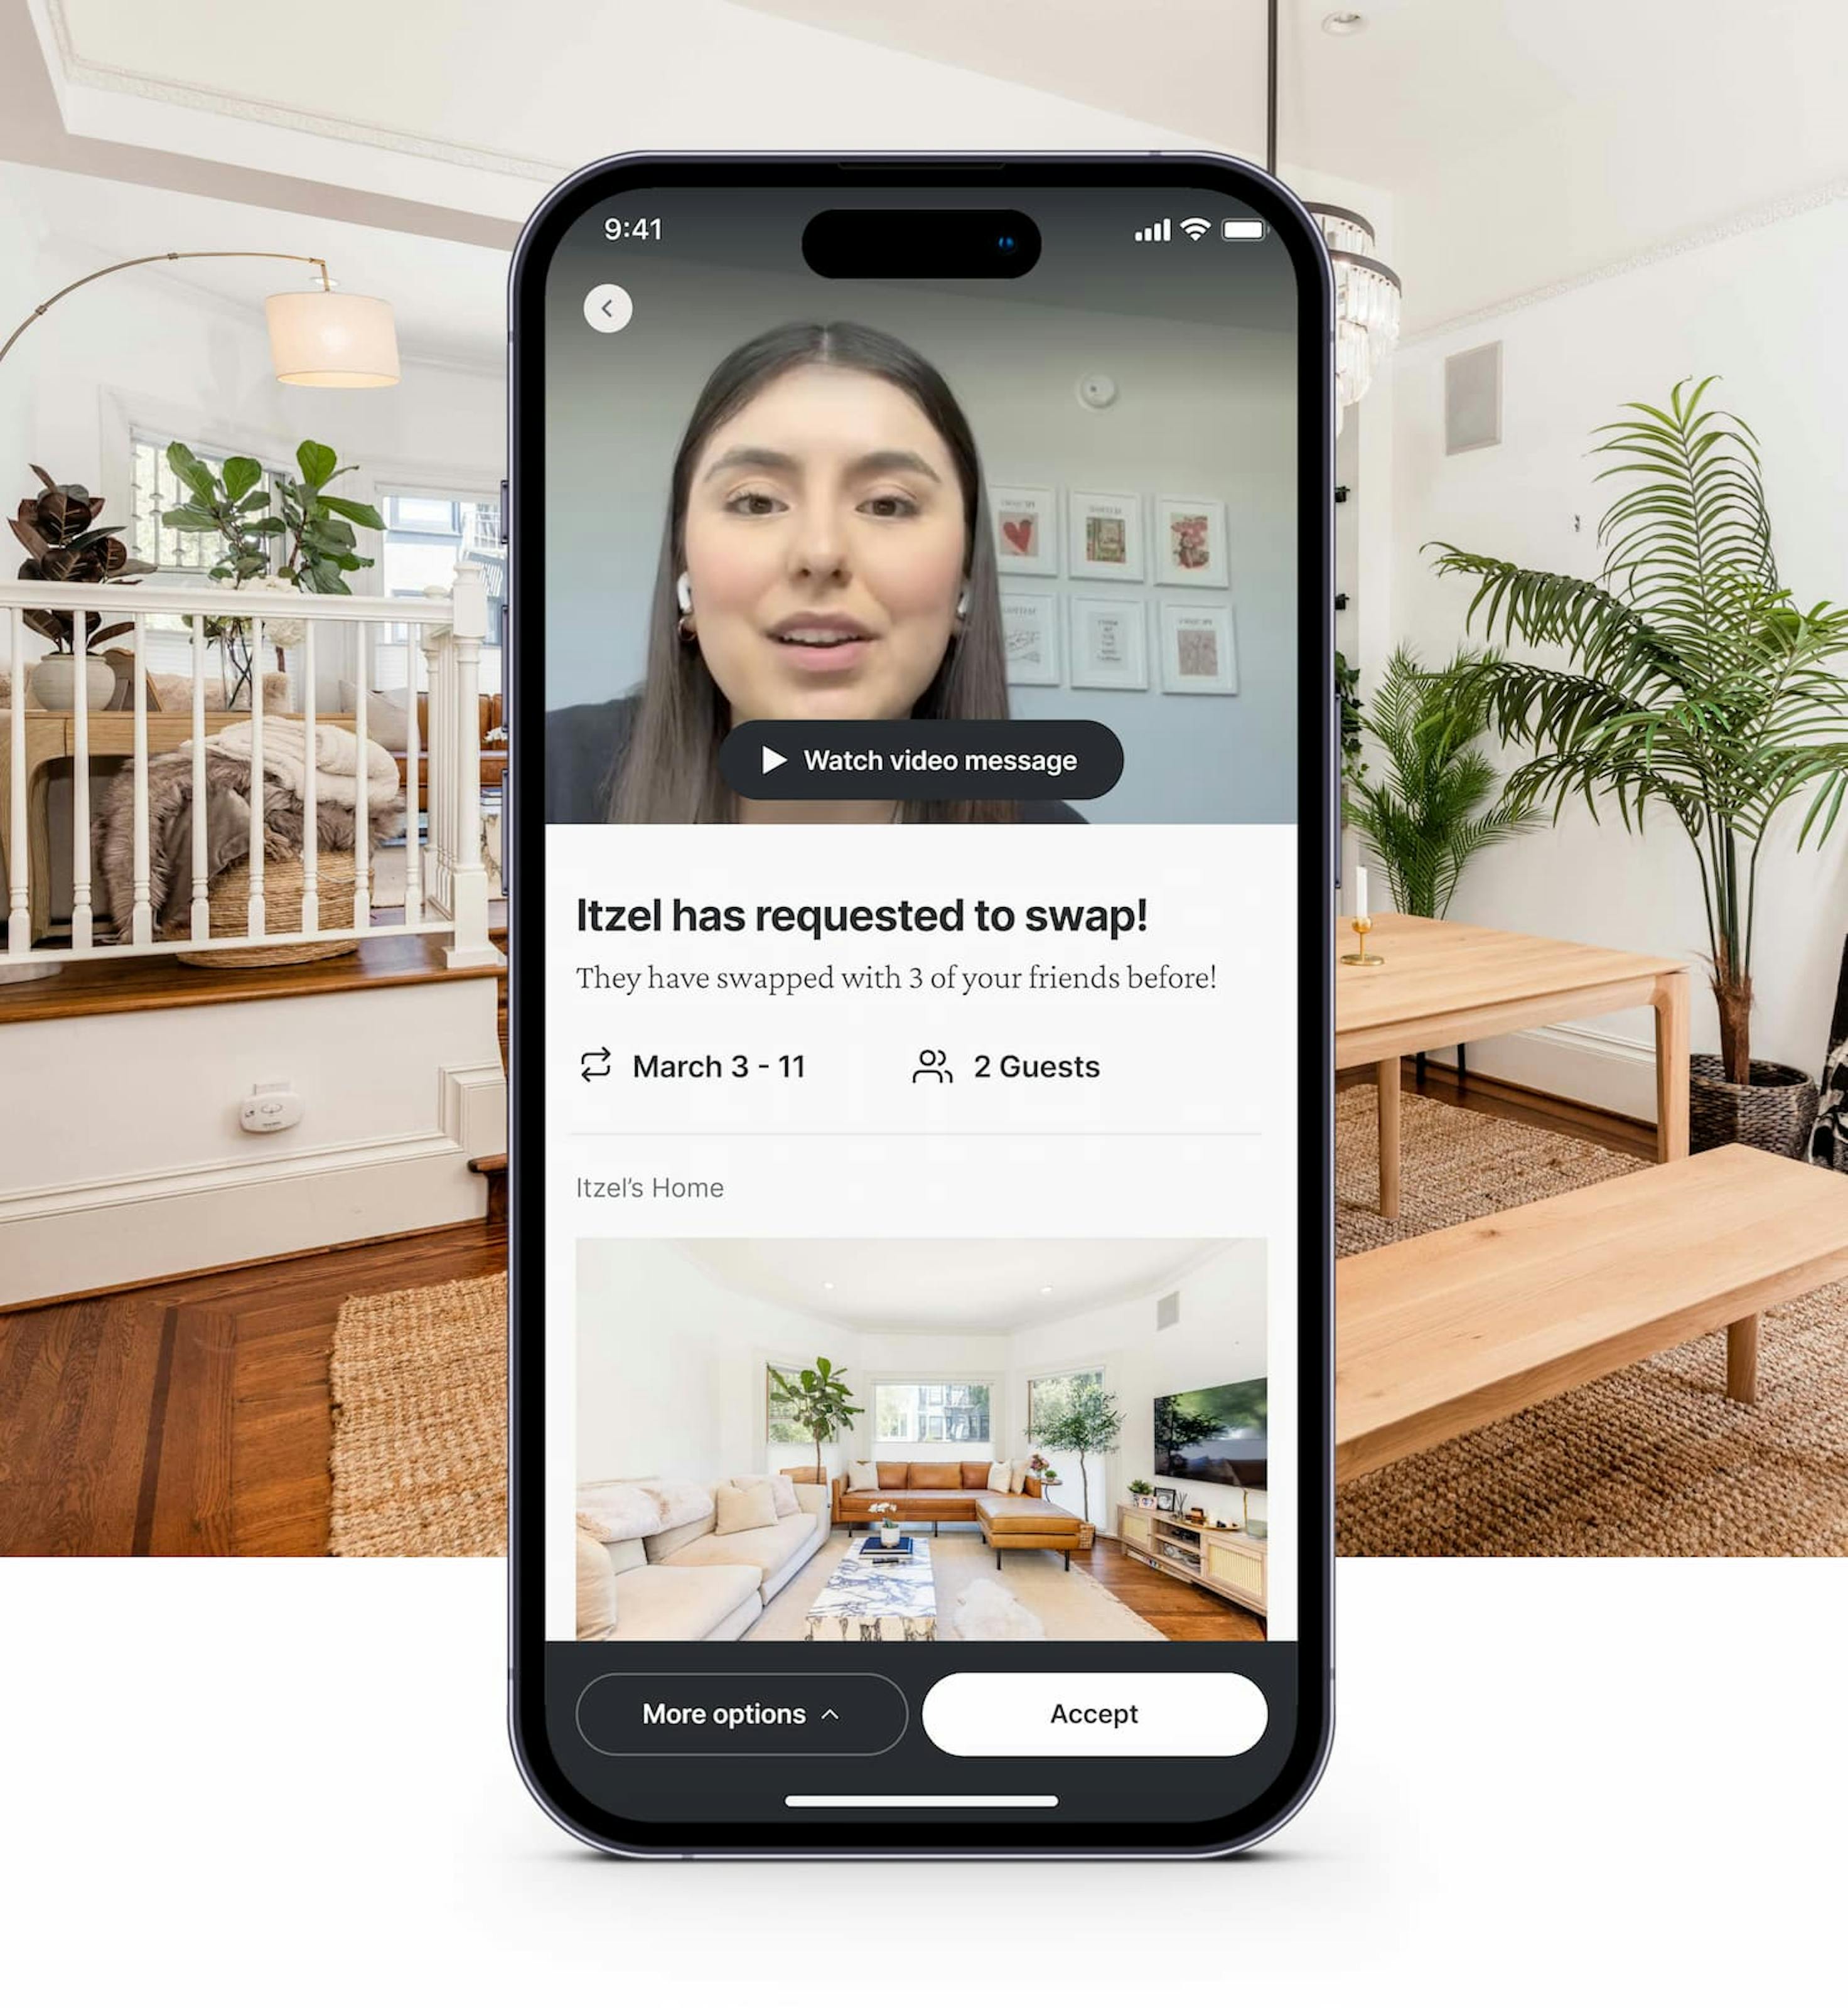 Connect with confidence and join Kindred today - our home swapping community built on trust. Experience safe home swapping with our video intro call, a key trust and safety measure. Click to watch our demo video and see how our members use this feature to ensure safe and enjoyable home swaps.